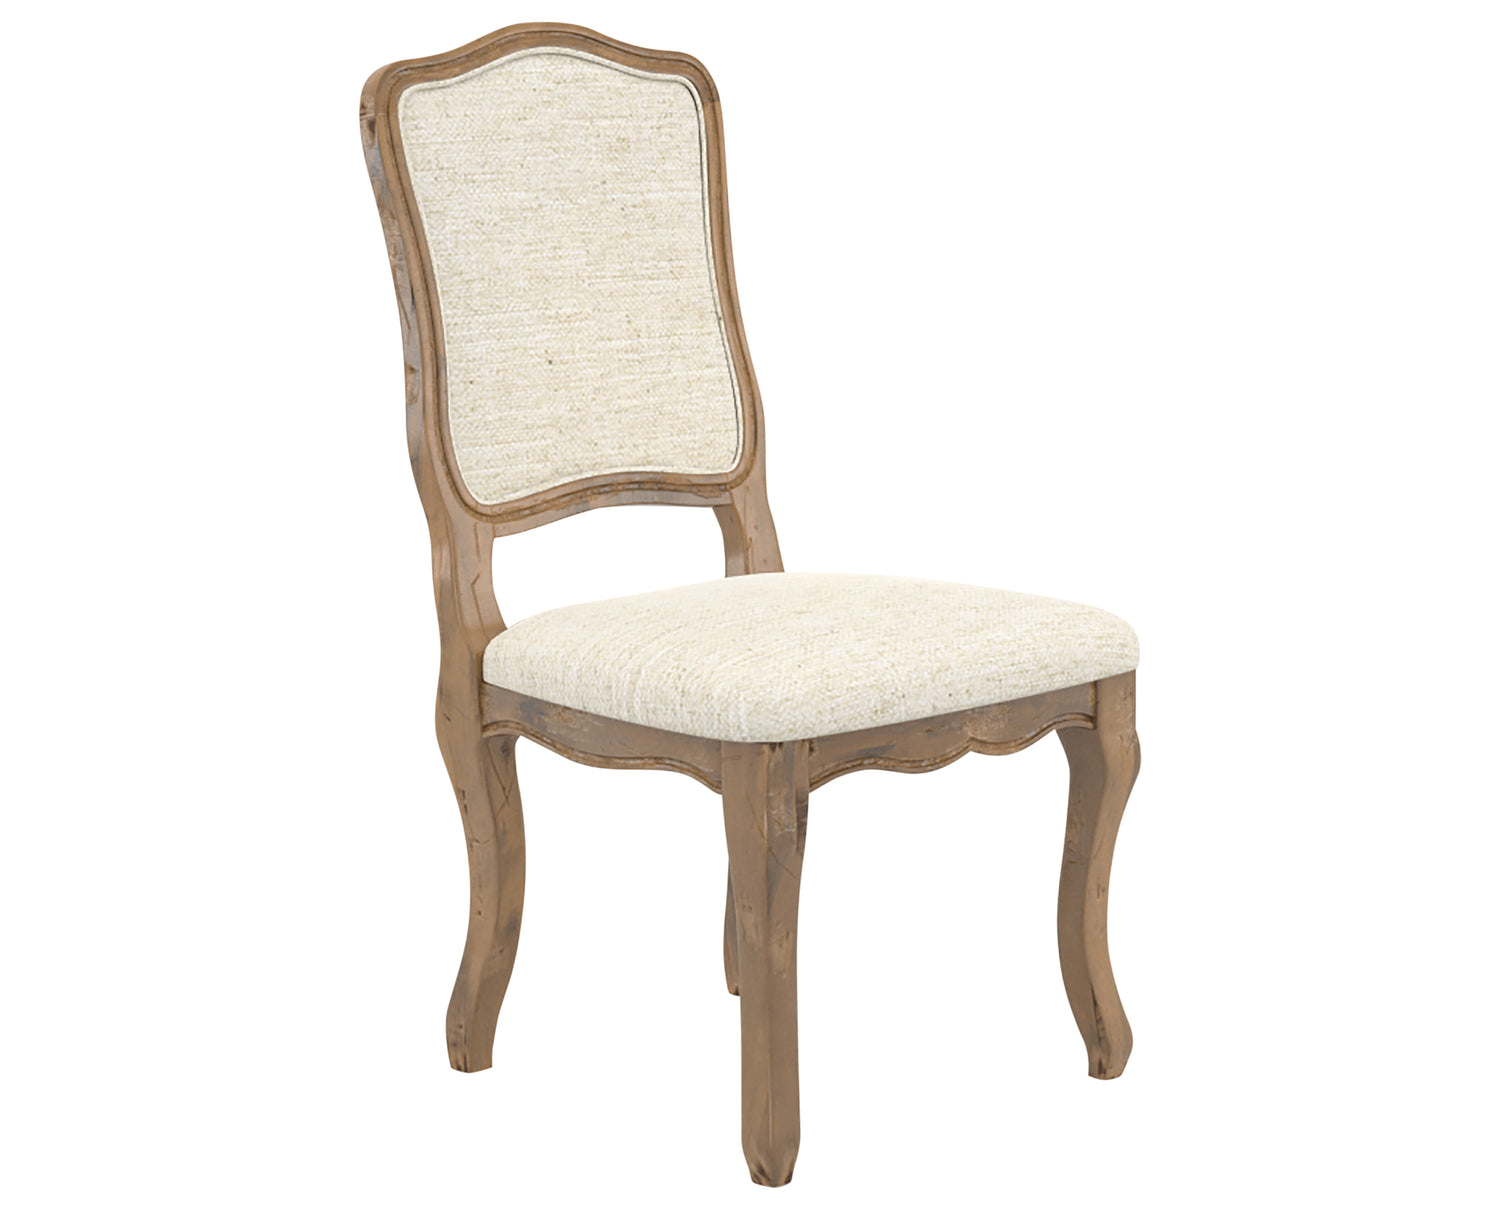 Oak Washed and Fabric TW | Canadel Champlain Dining Chair 316 | Valley Ridge Furniture